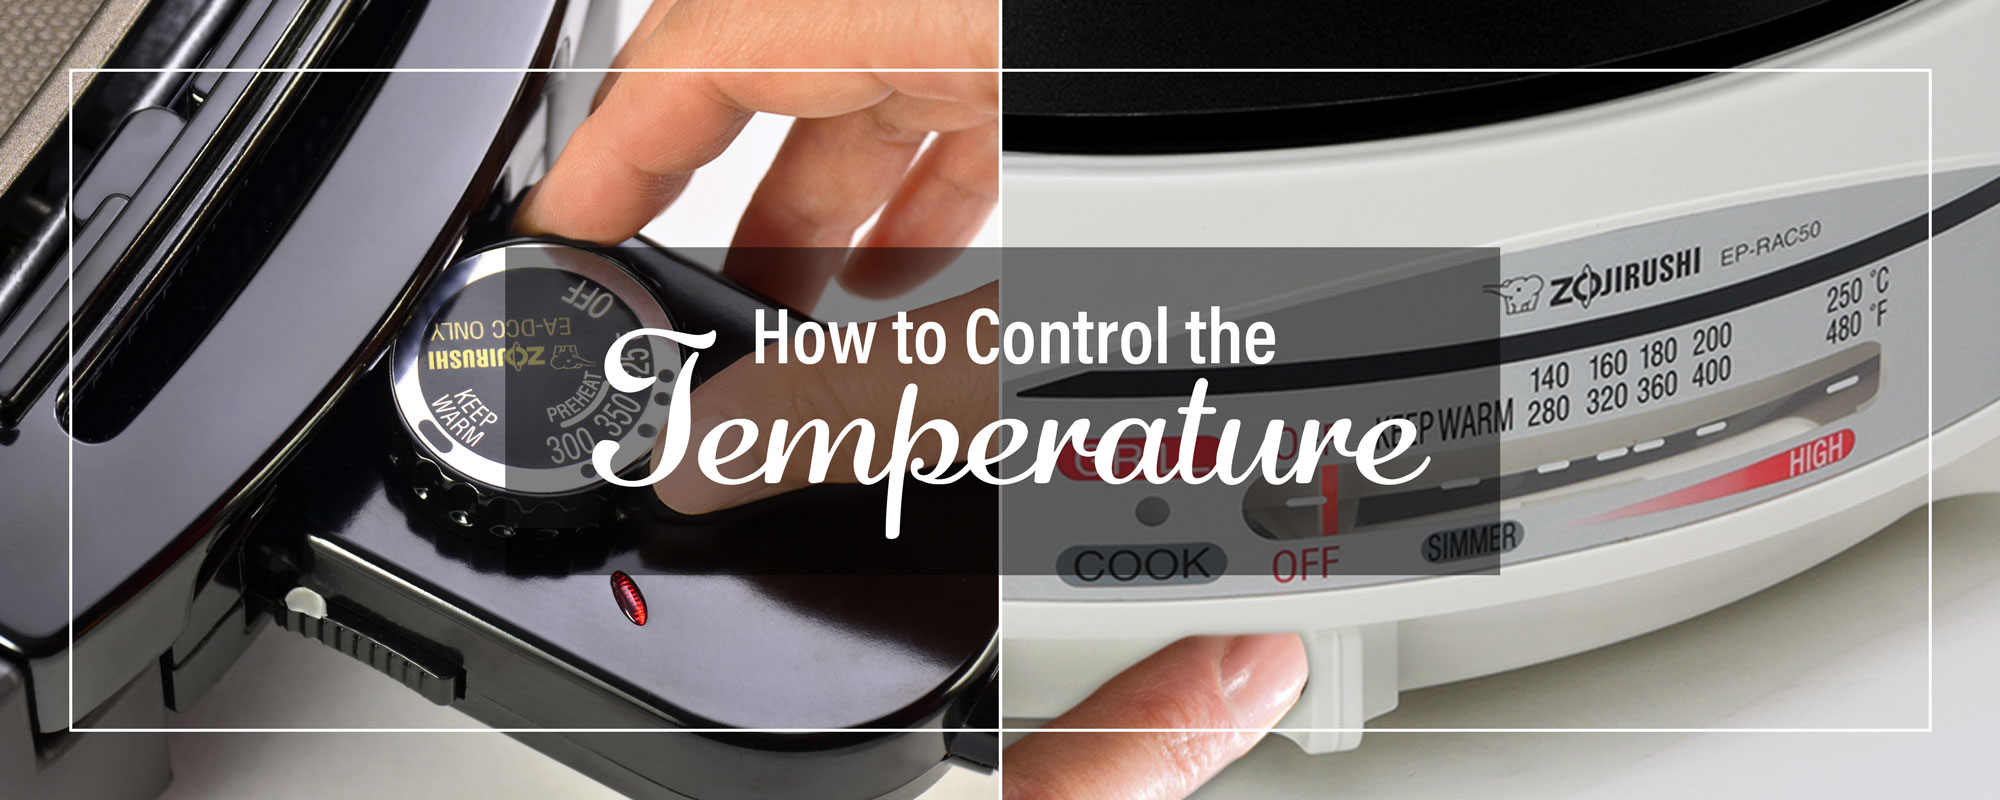 How to Control the Temperature